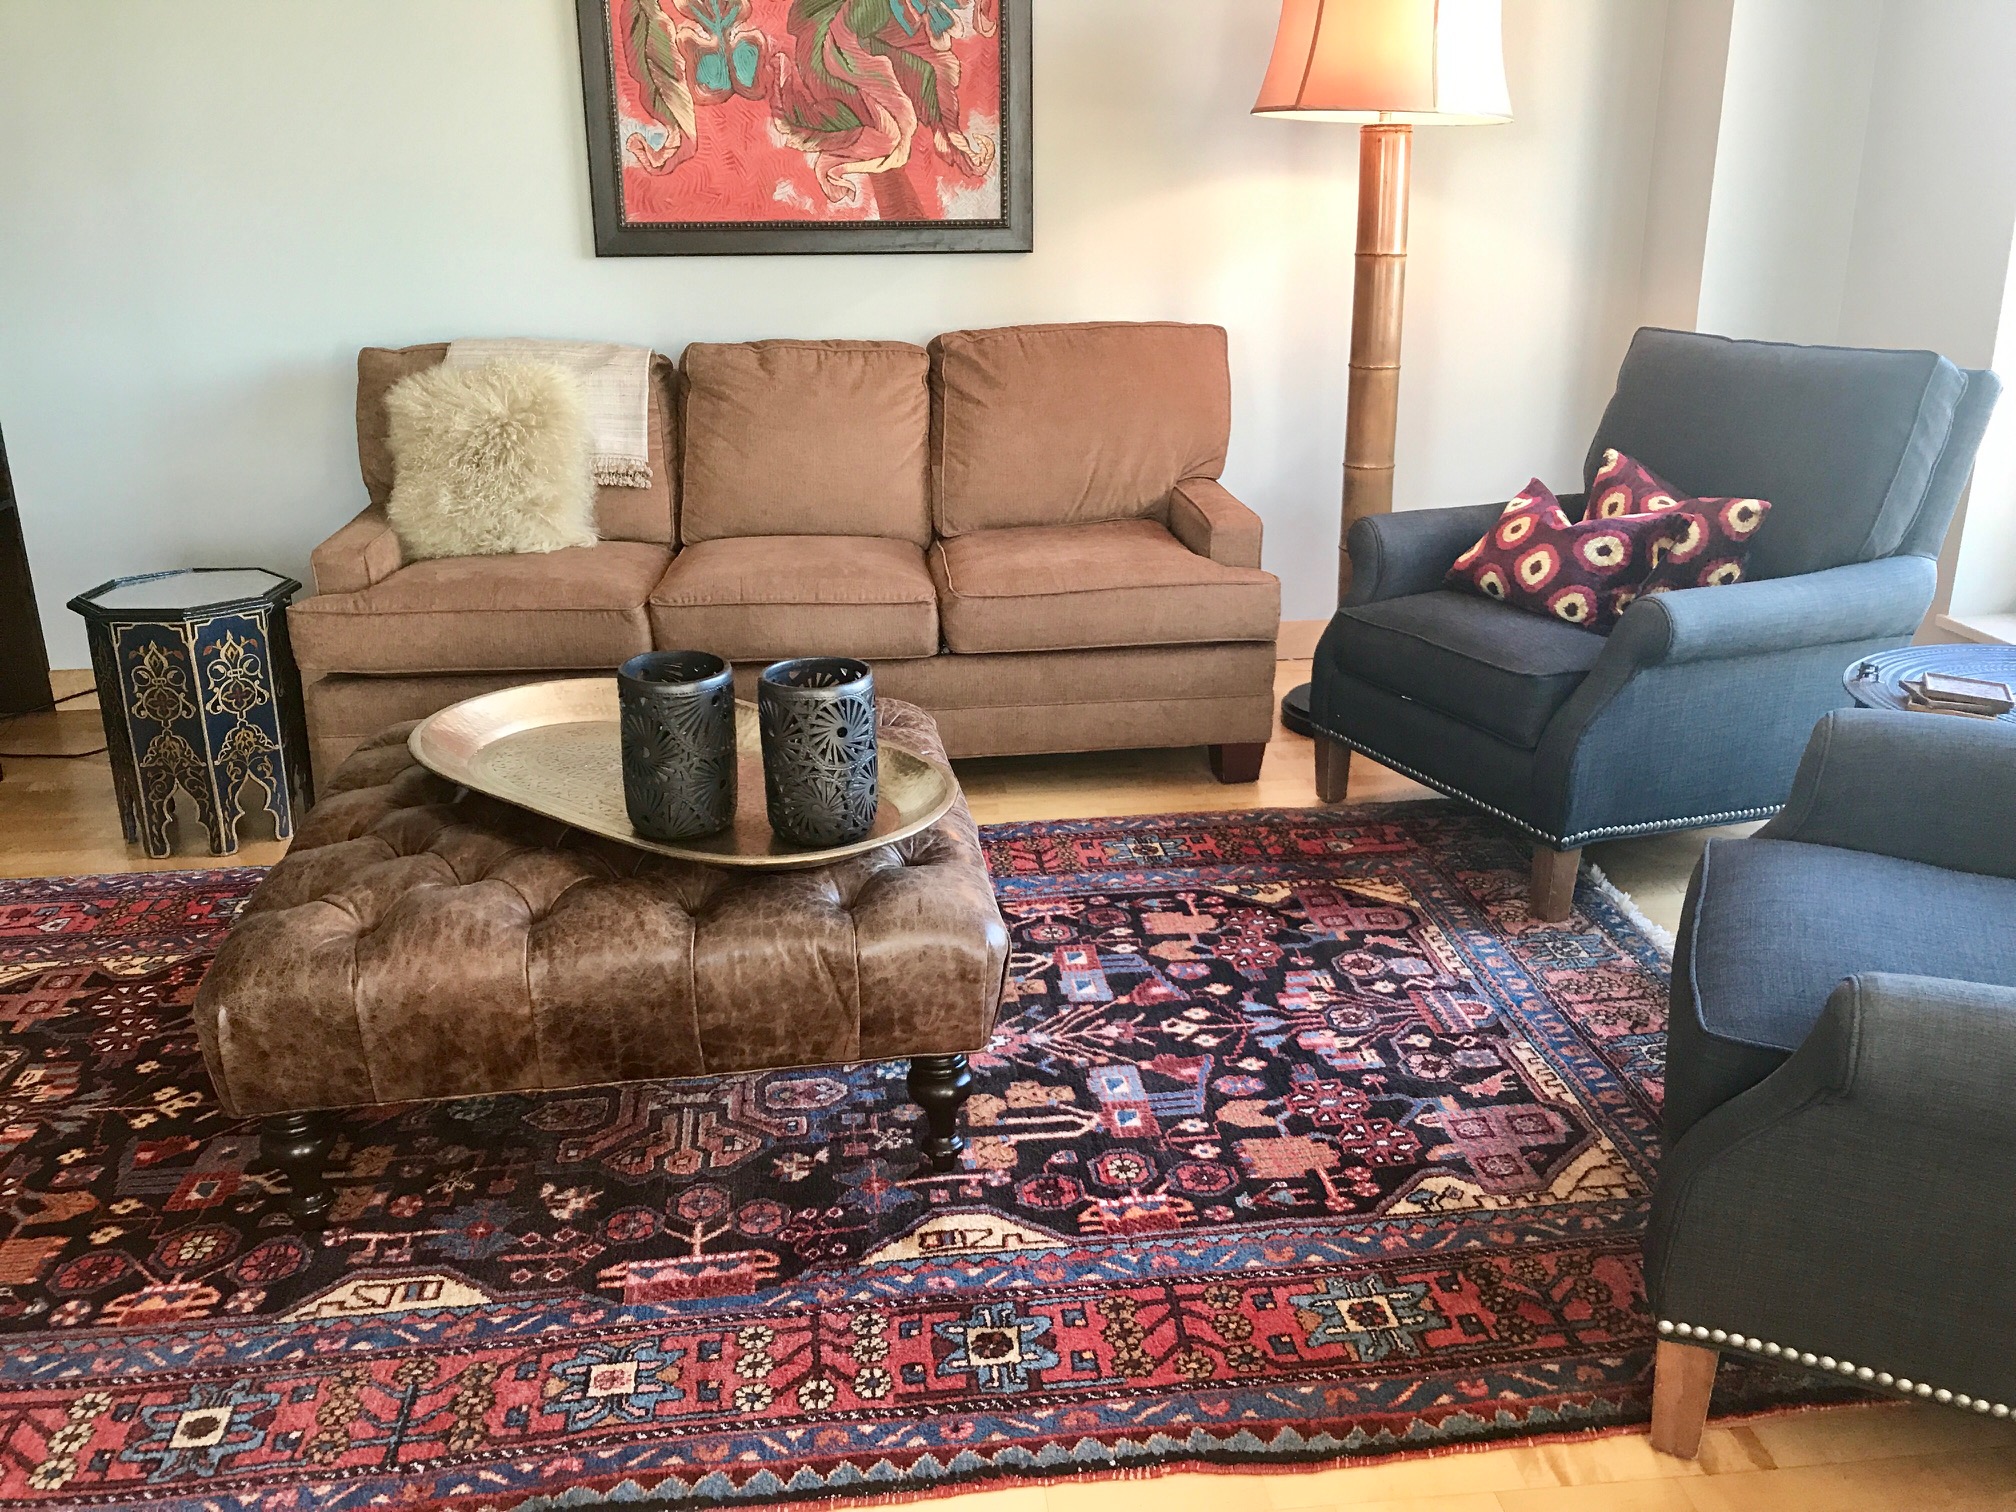 Style Guide: How to Select a Larger Handmade Rug for your Living Room